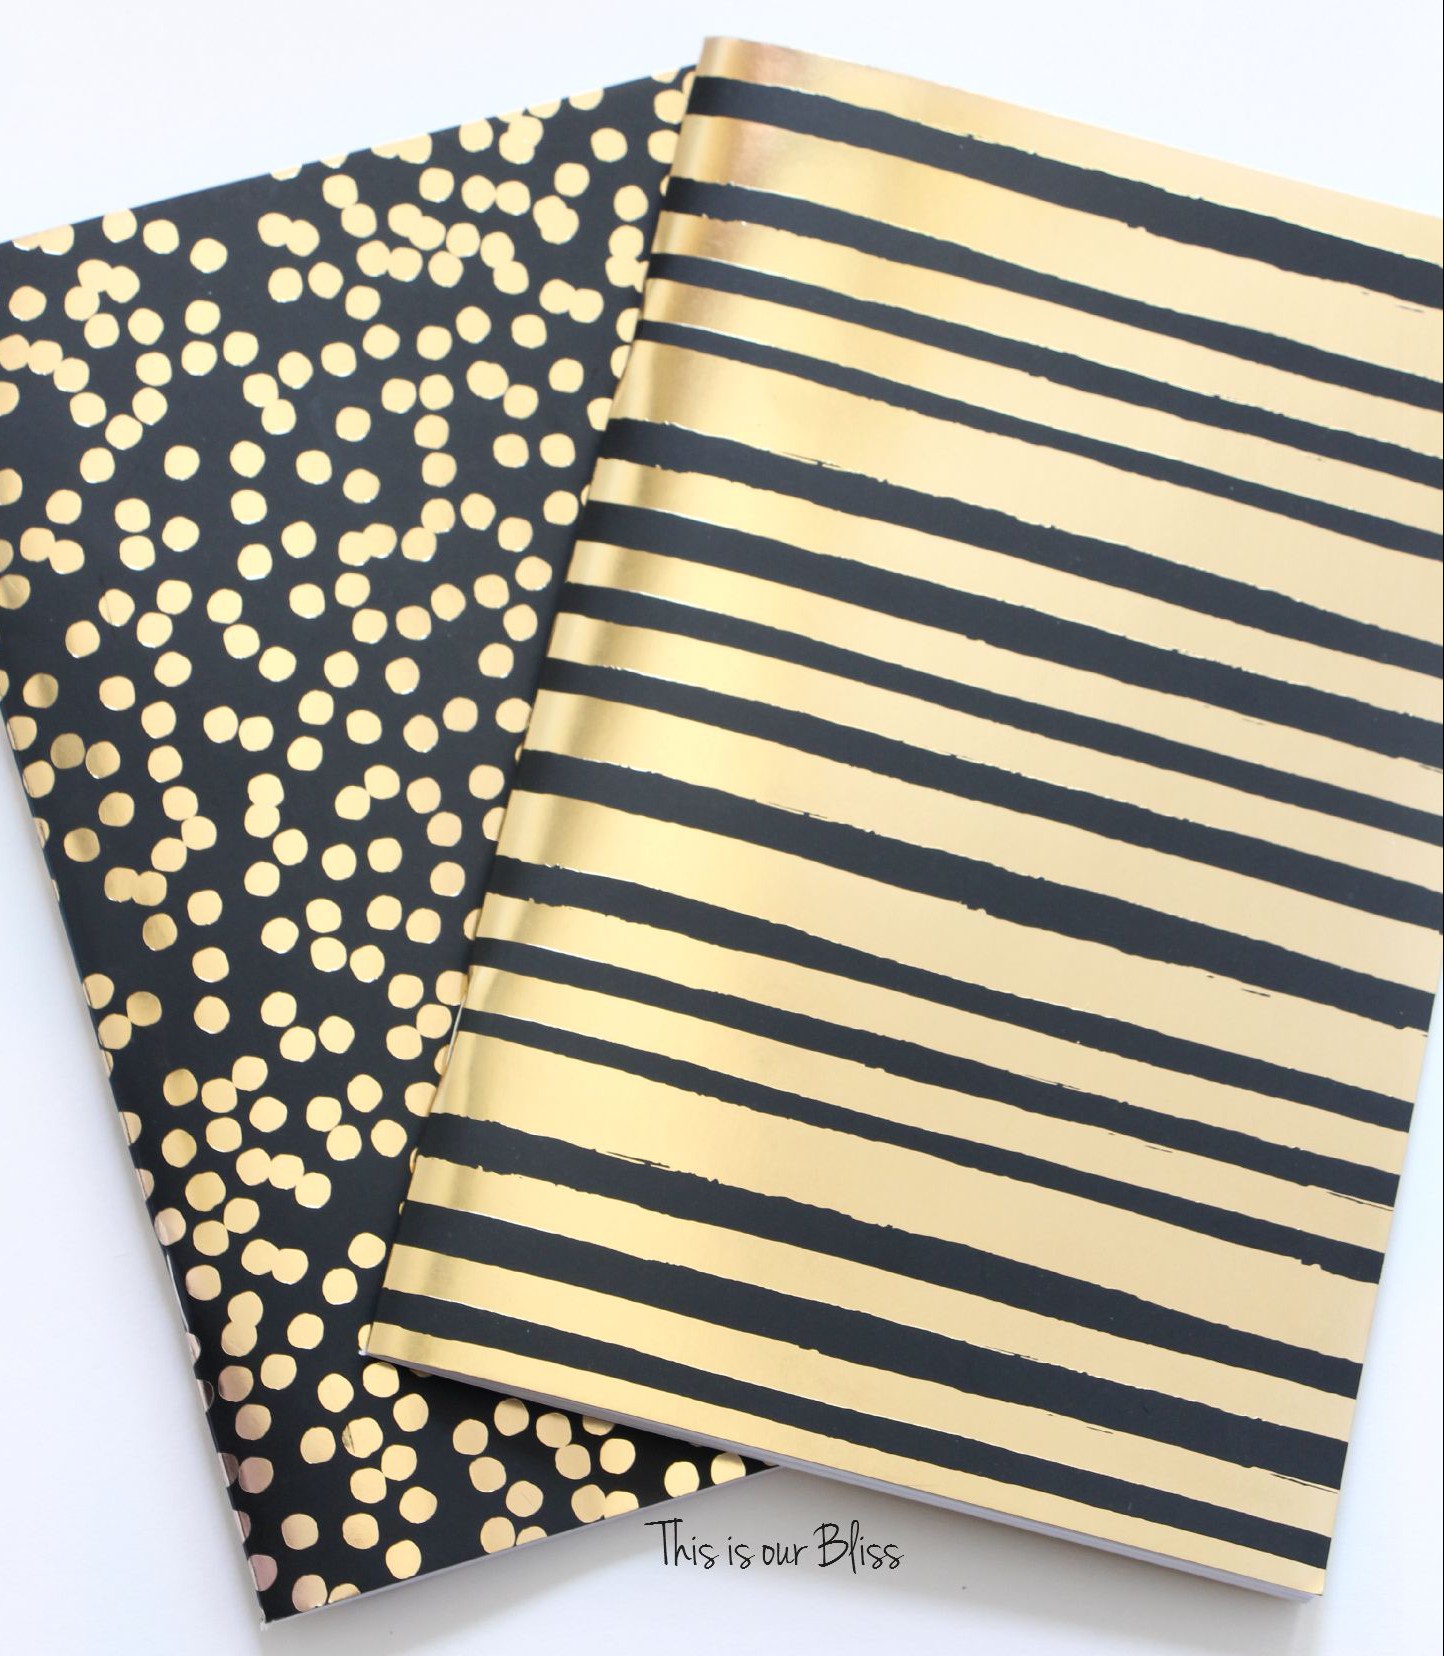 2 pack journals - black & gold foil polka dot journal turned art - guestroom art - gallery wall - This is our Bliss